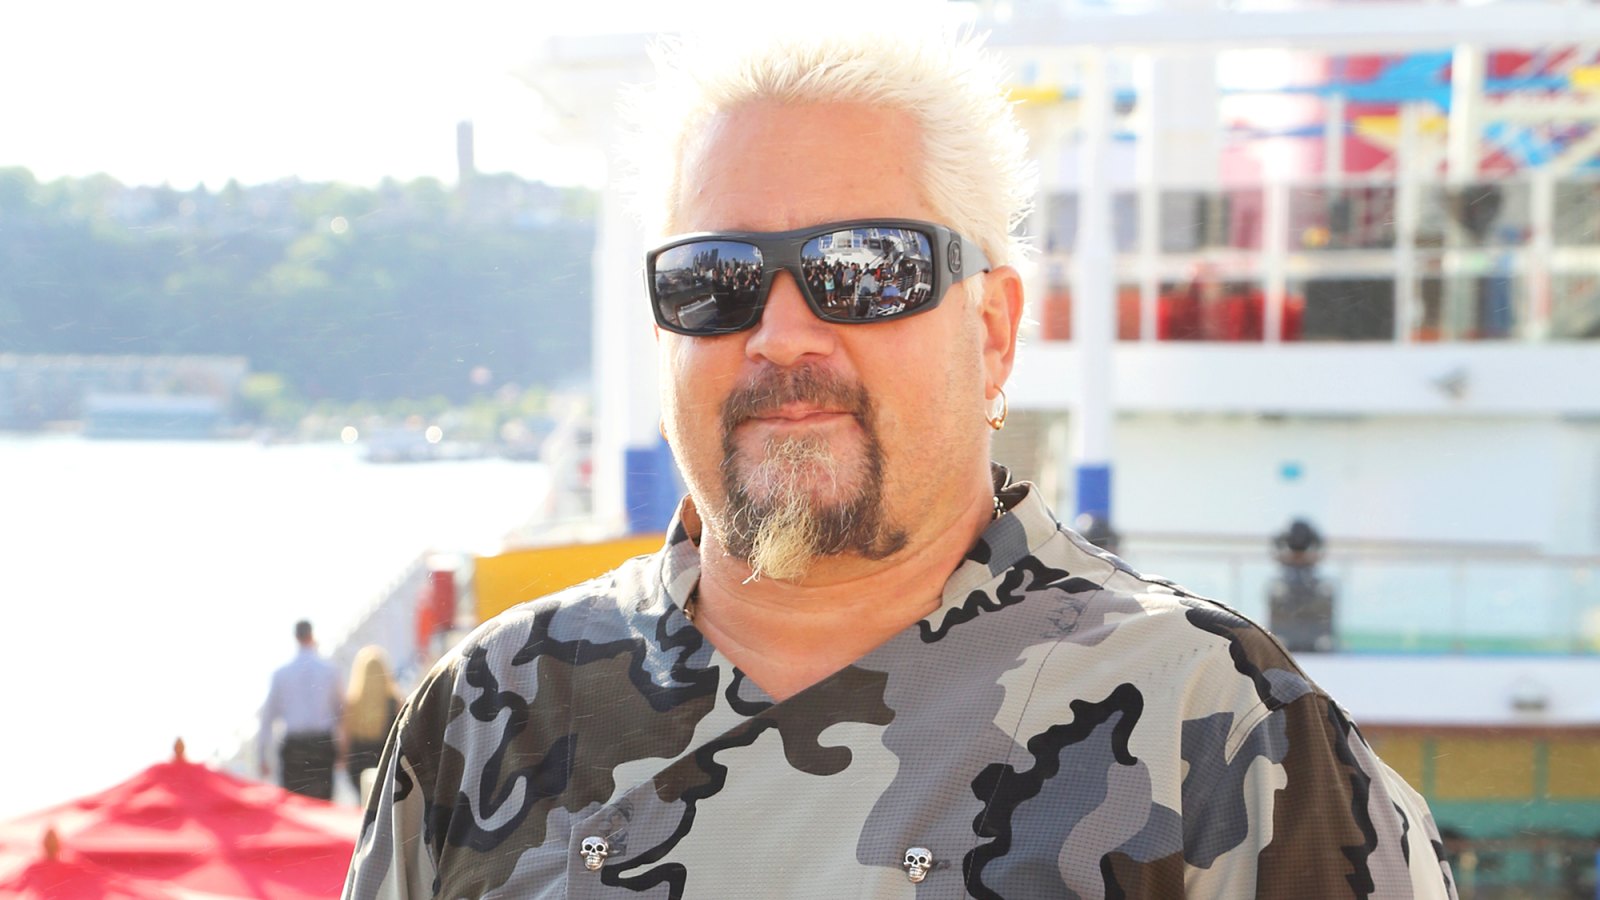 Guy Fieri attends Carnival Horizon naming ceremony event at Pier 88 on May 23, 2018 in New York City.